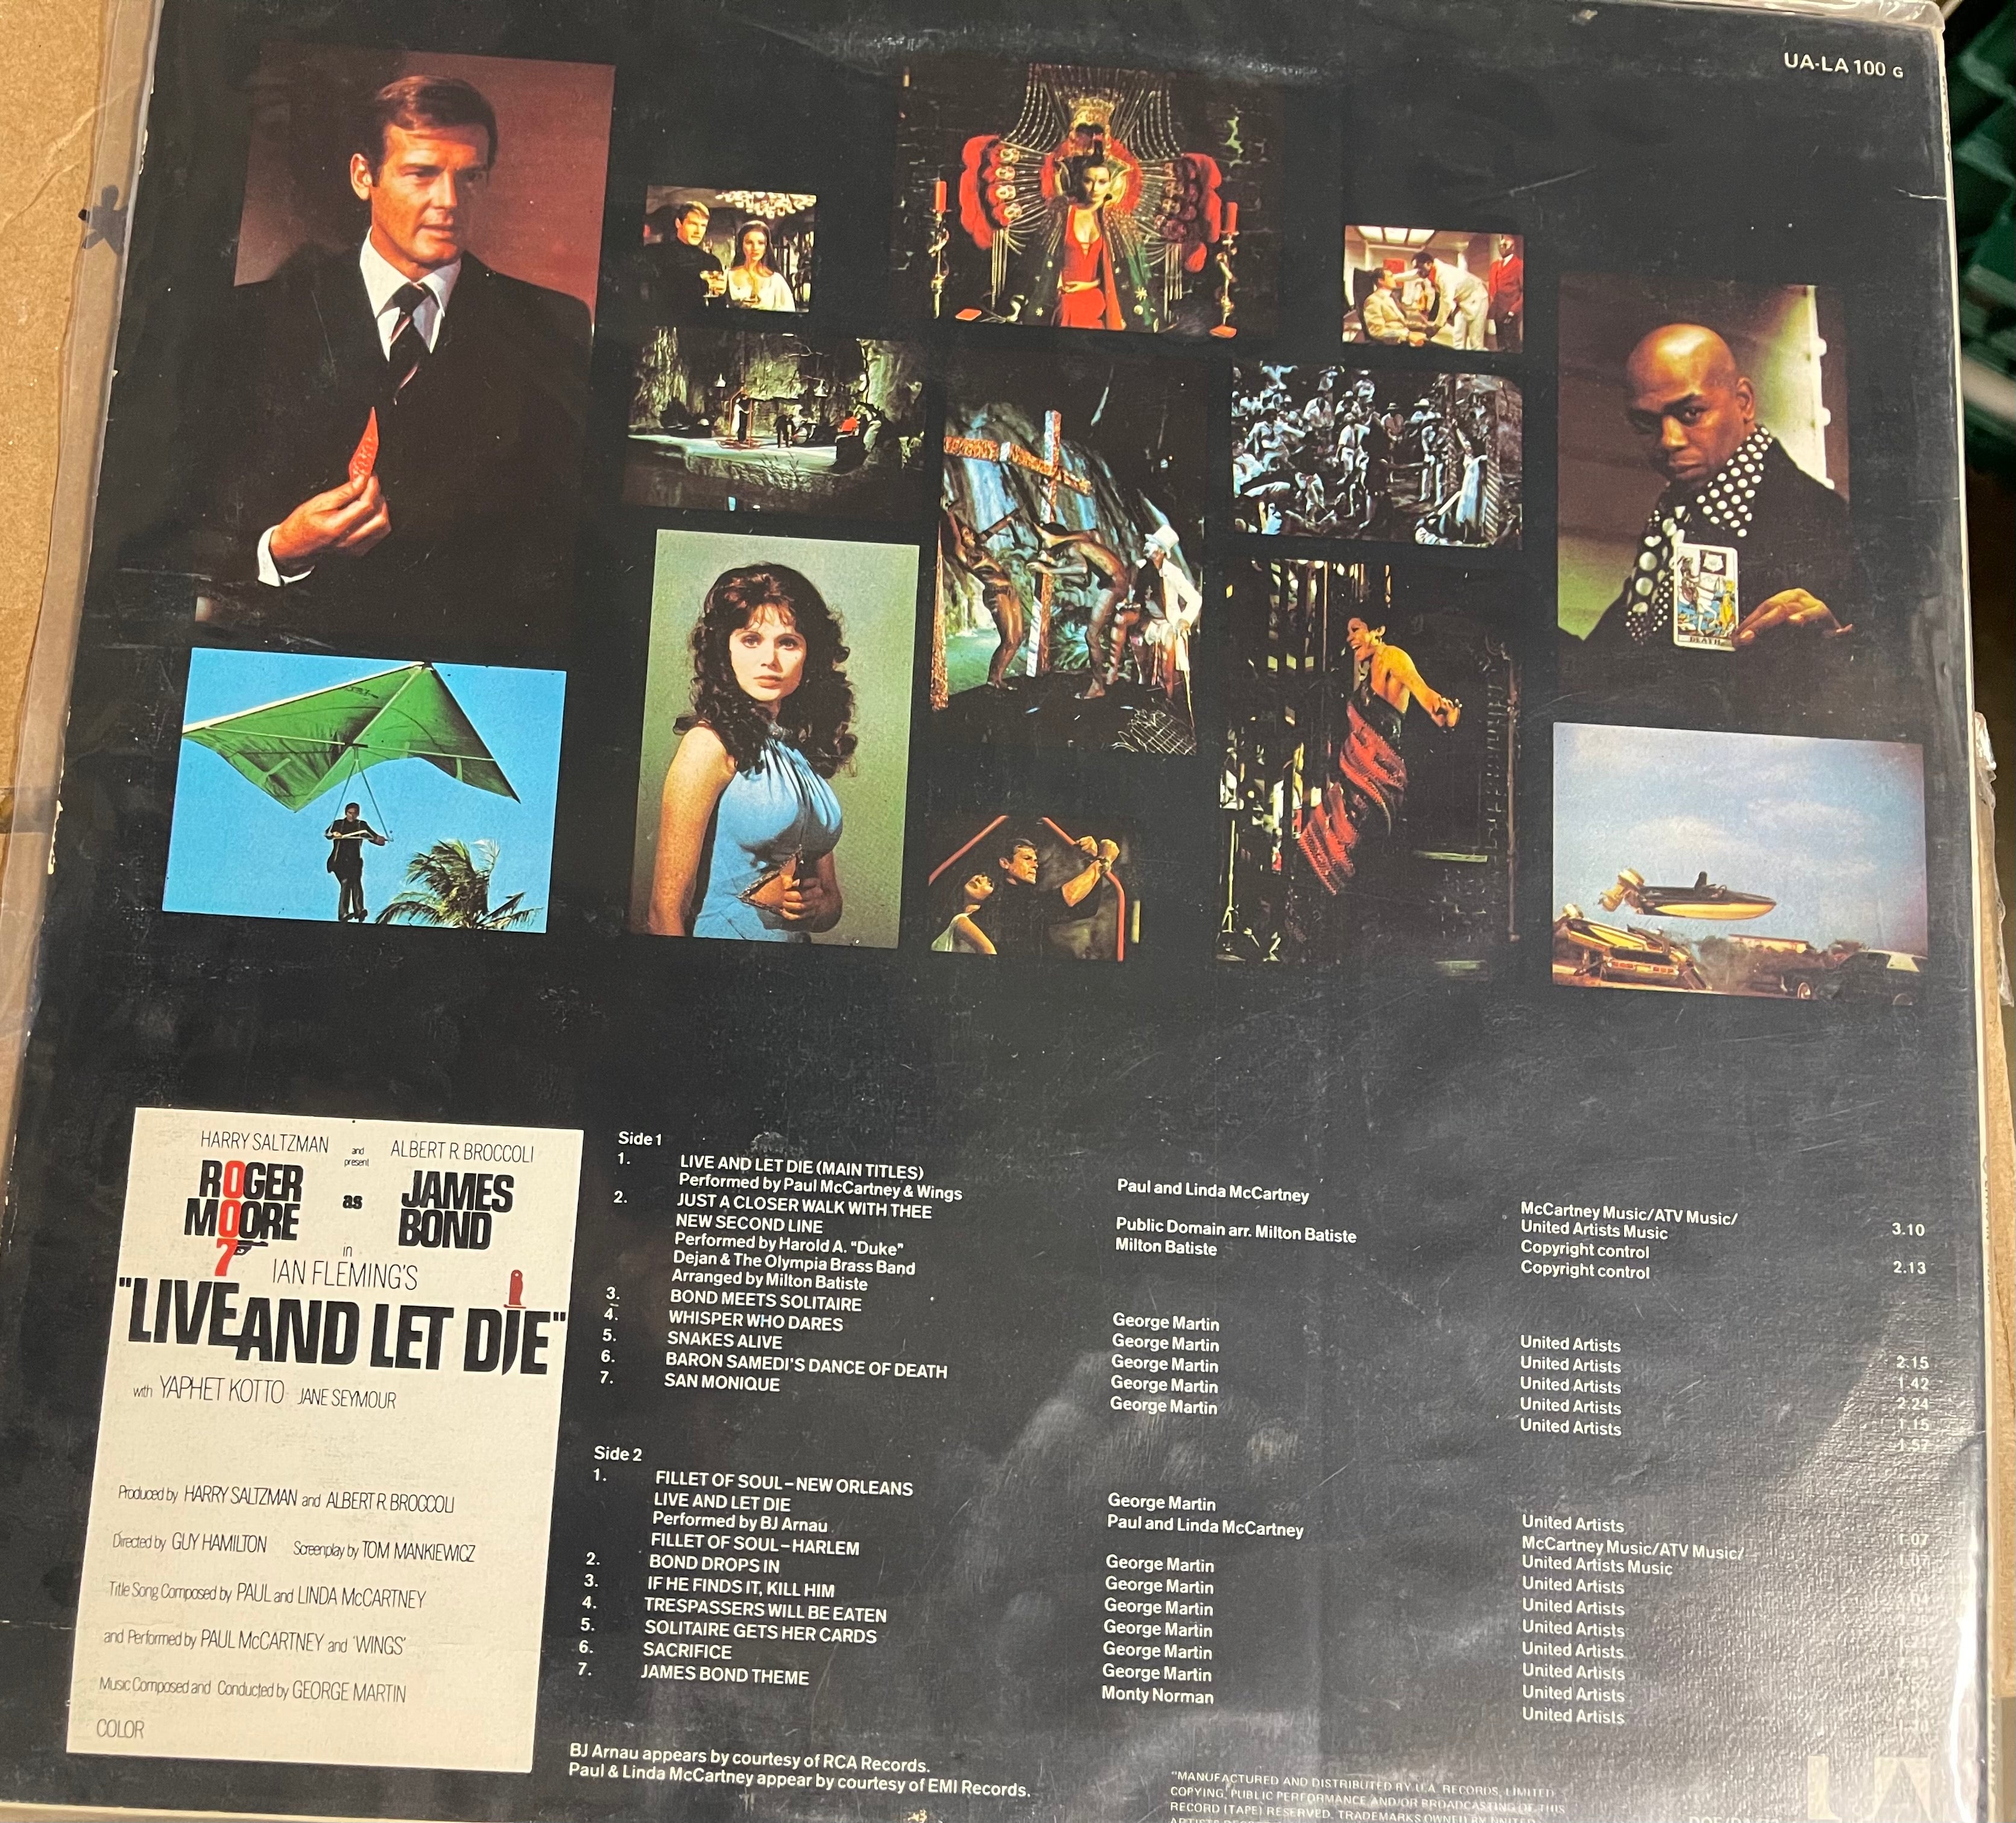 Great vintage record album from this famous James Bond movie 1973